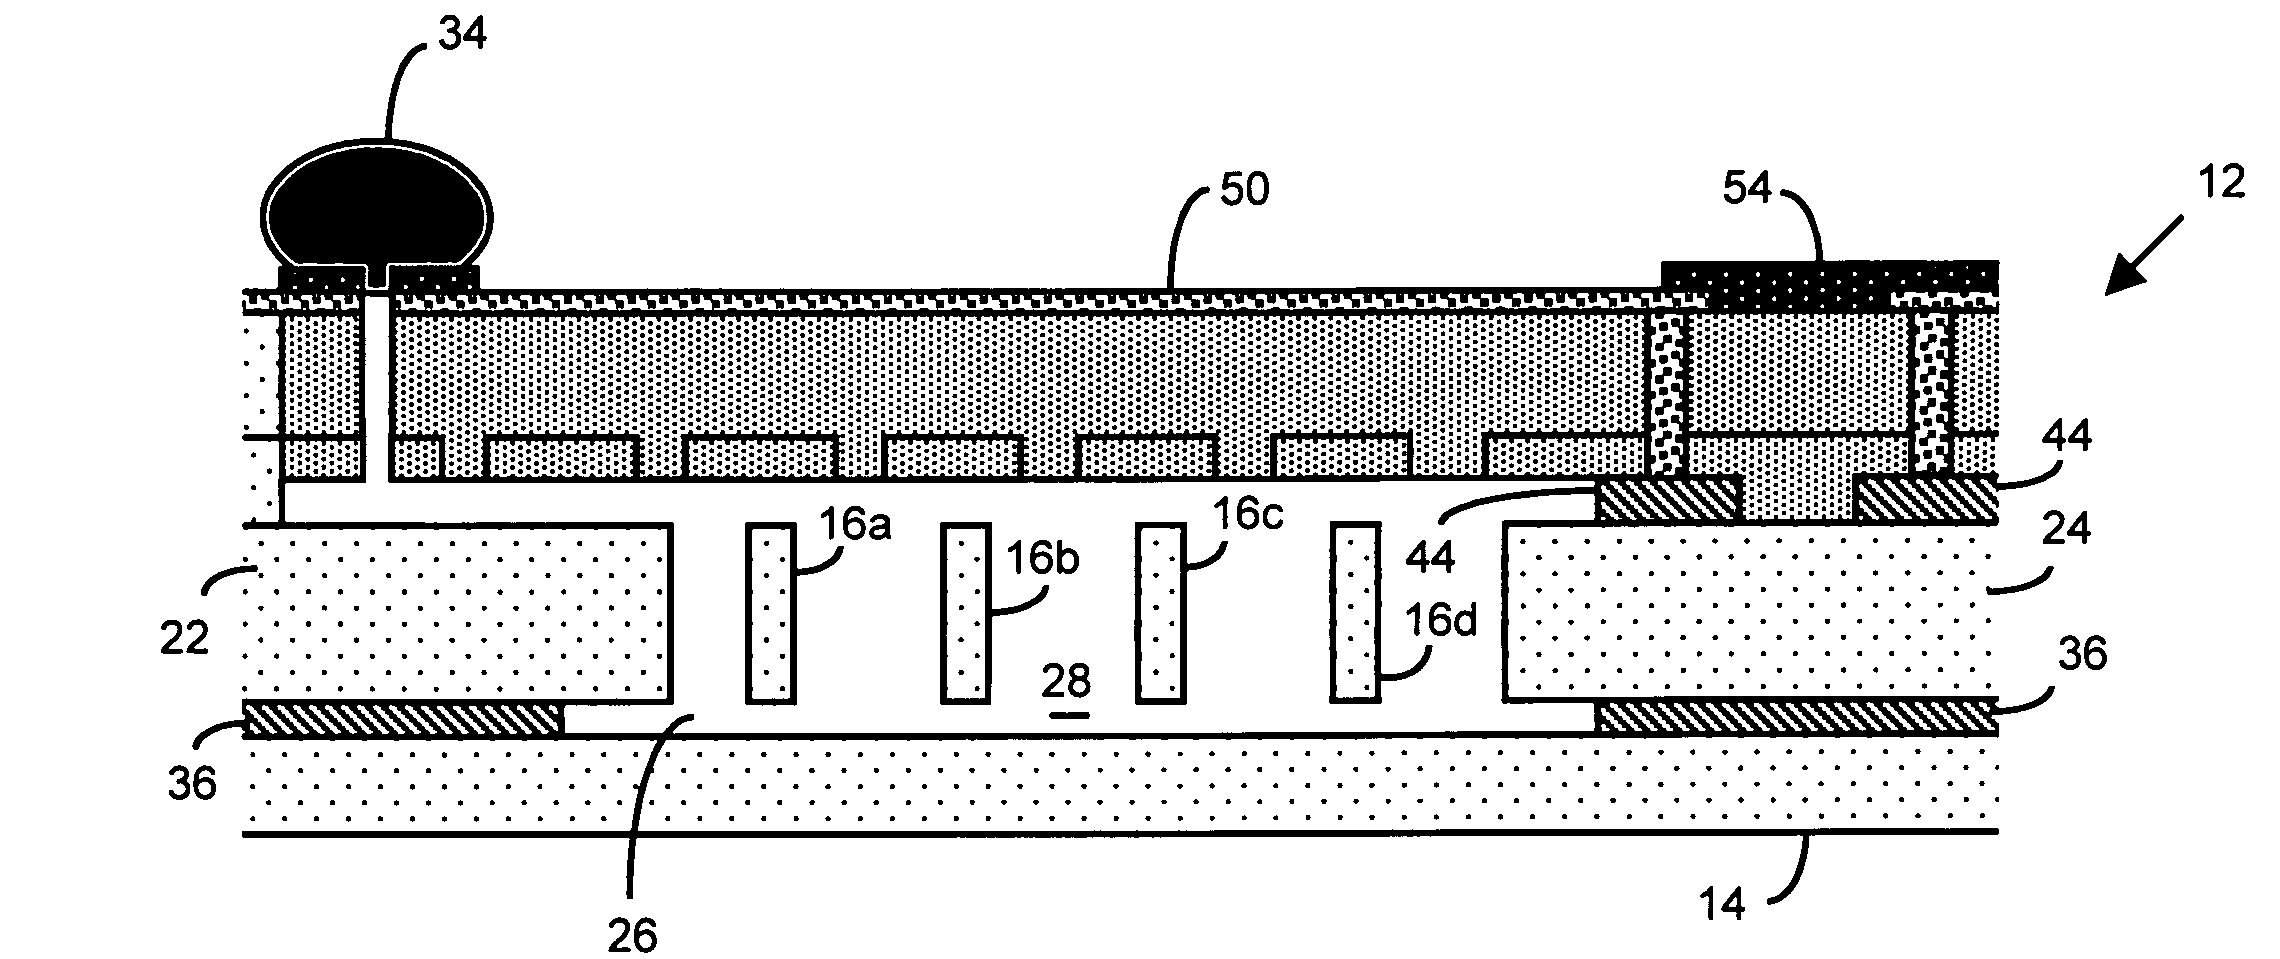 Anti-stiction technique for electromechanical systems and electromechanical device employing same